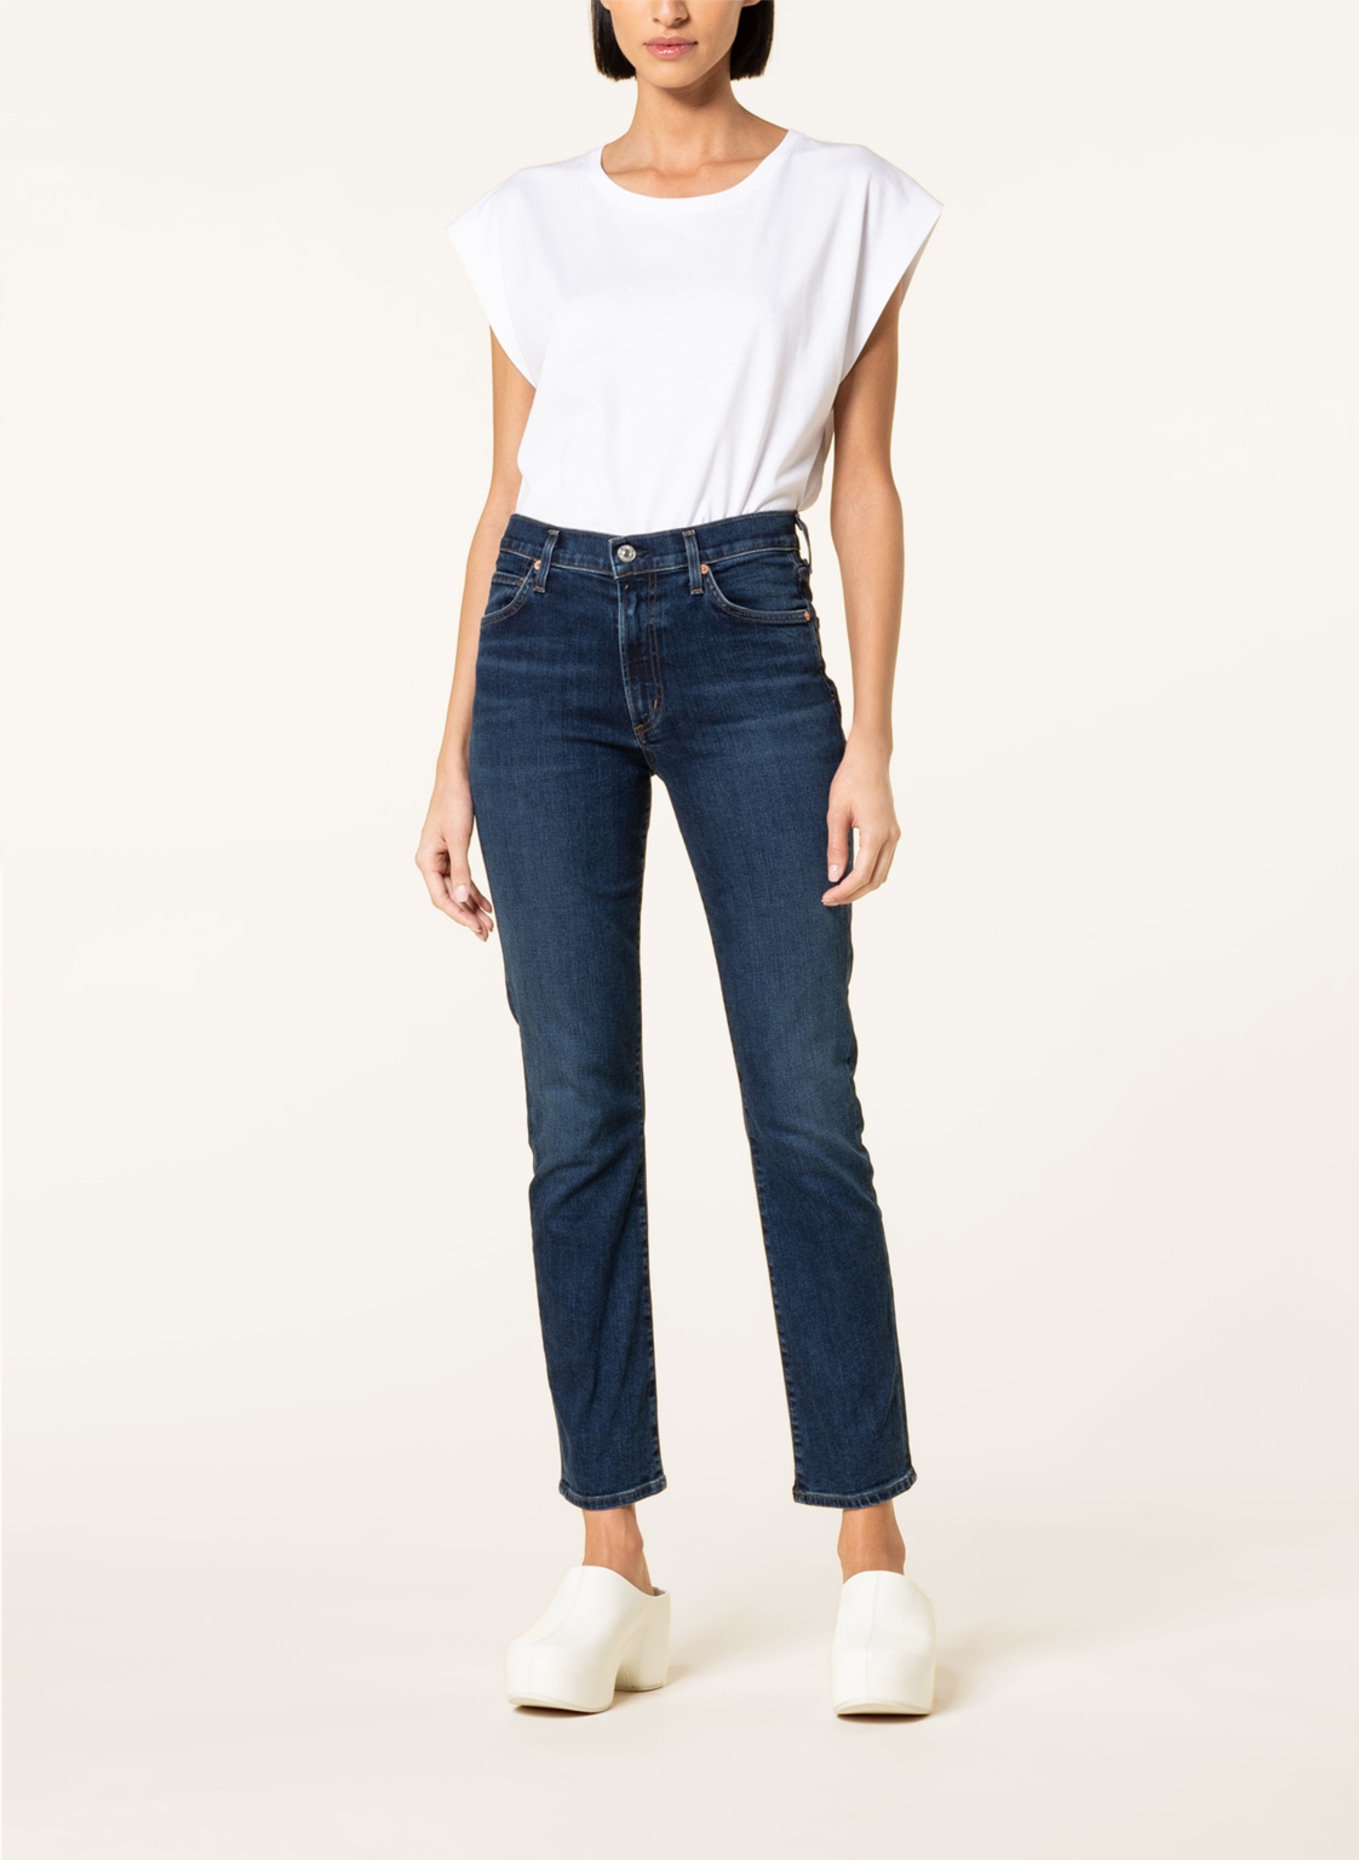 CITIZENS of HUMANITY Skinny jeans SKYLA , Color: Evermore dk indigo (Image 2)